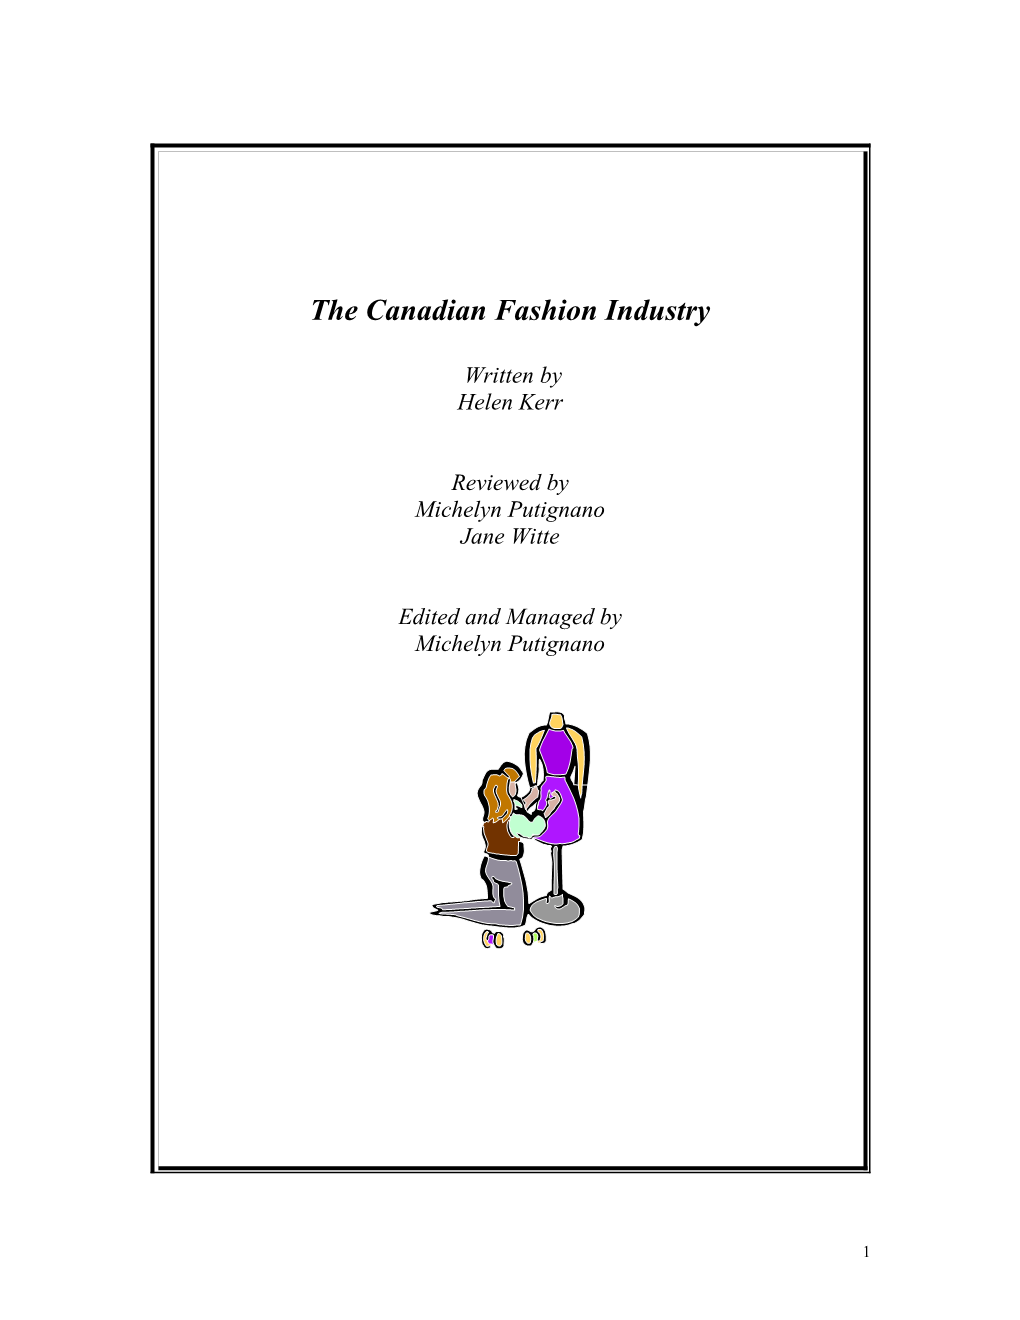 Fashion Industry with a Focus on Fashion in Canada